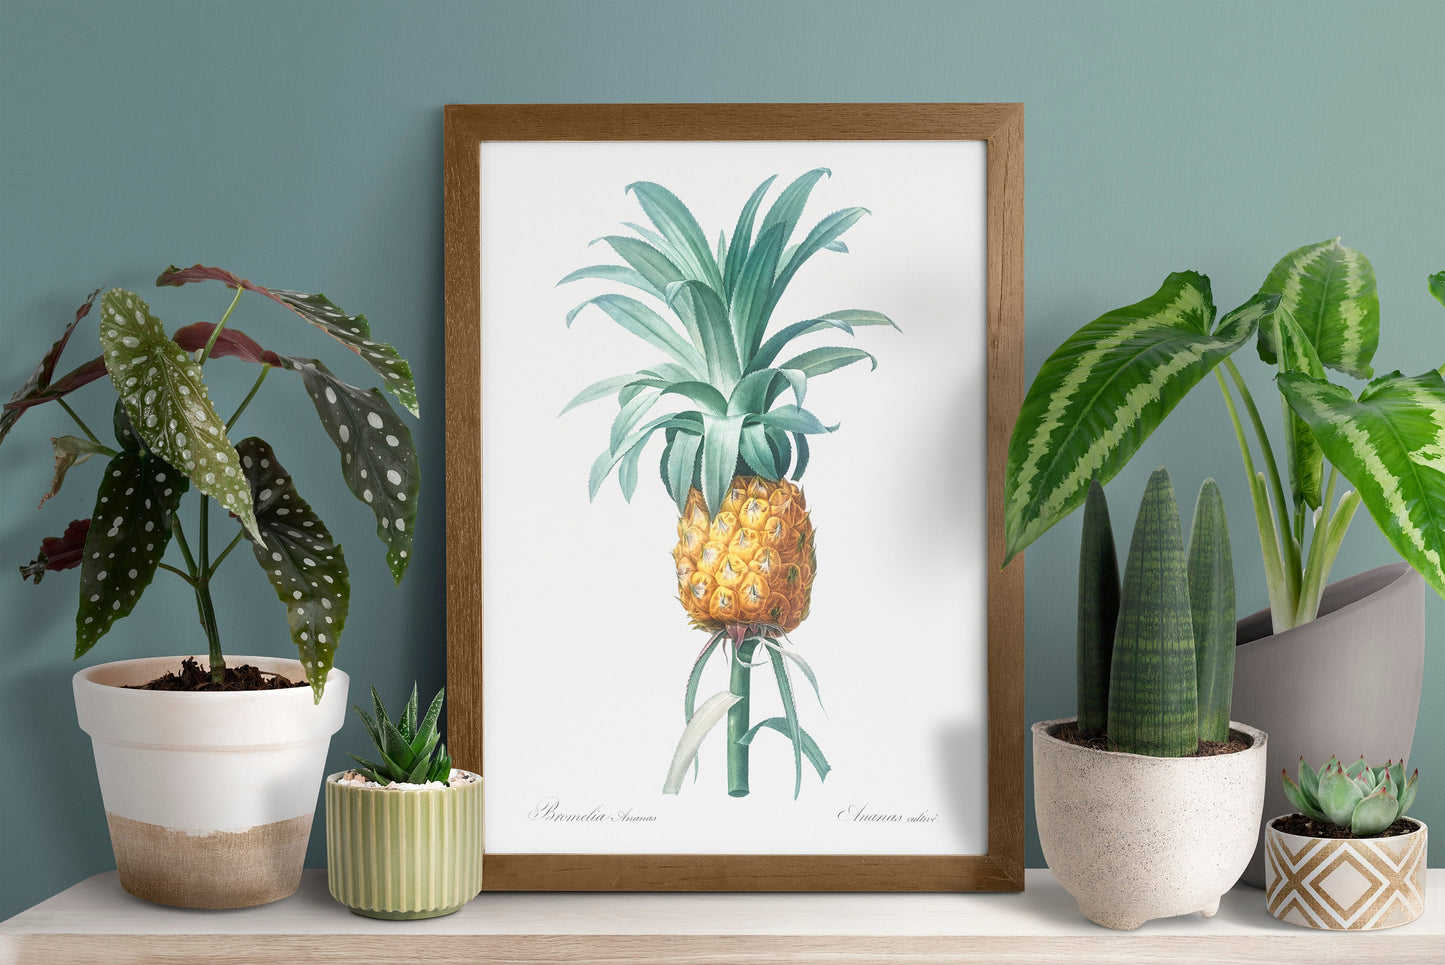 Pineapple illustration from Les liliacées (1805) by Pierre-Joseph Redouté Poster Print Wall Hanging Decor